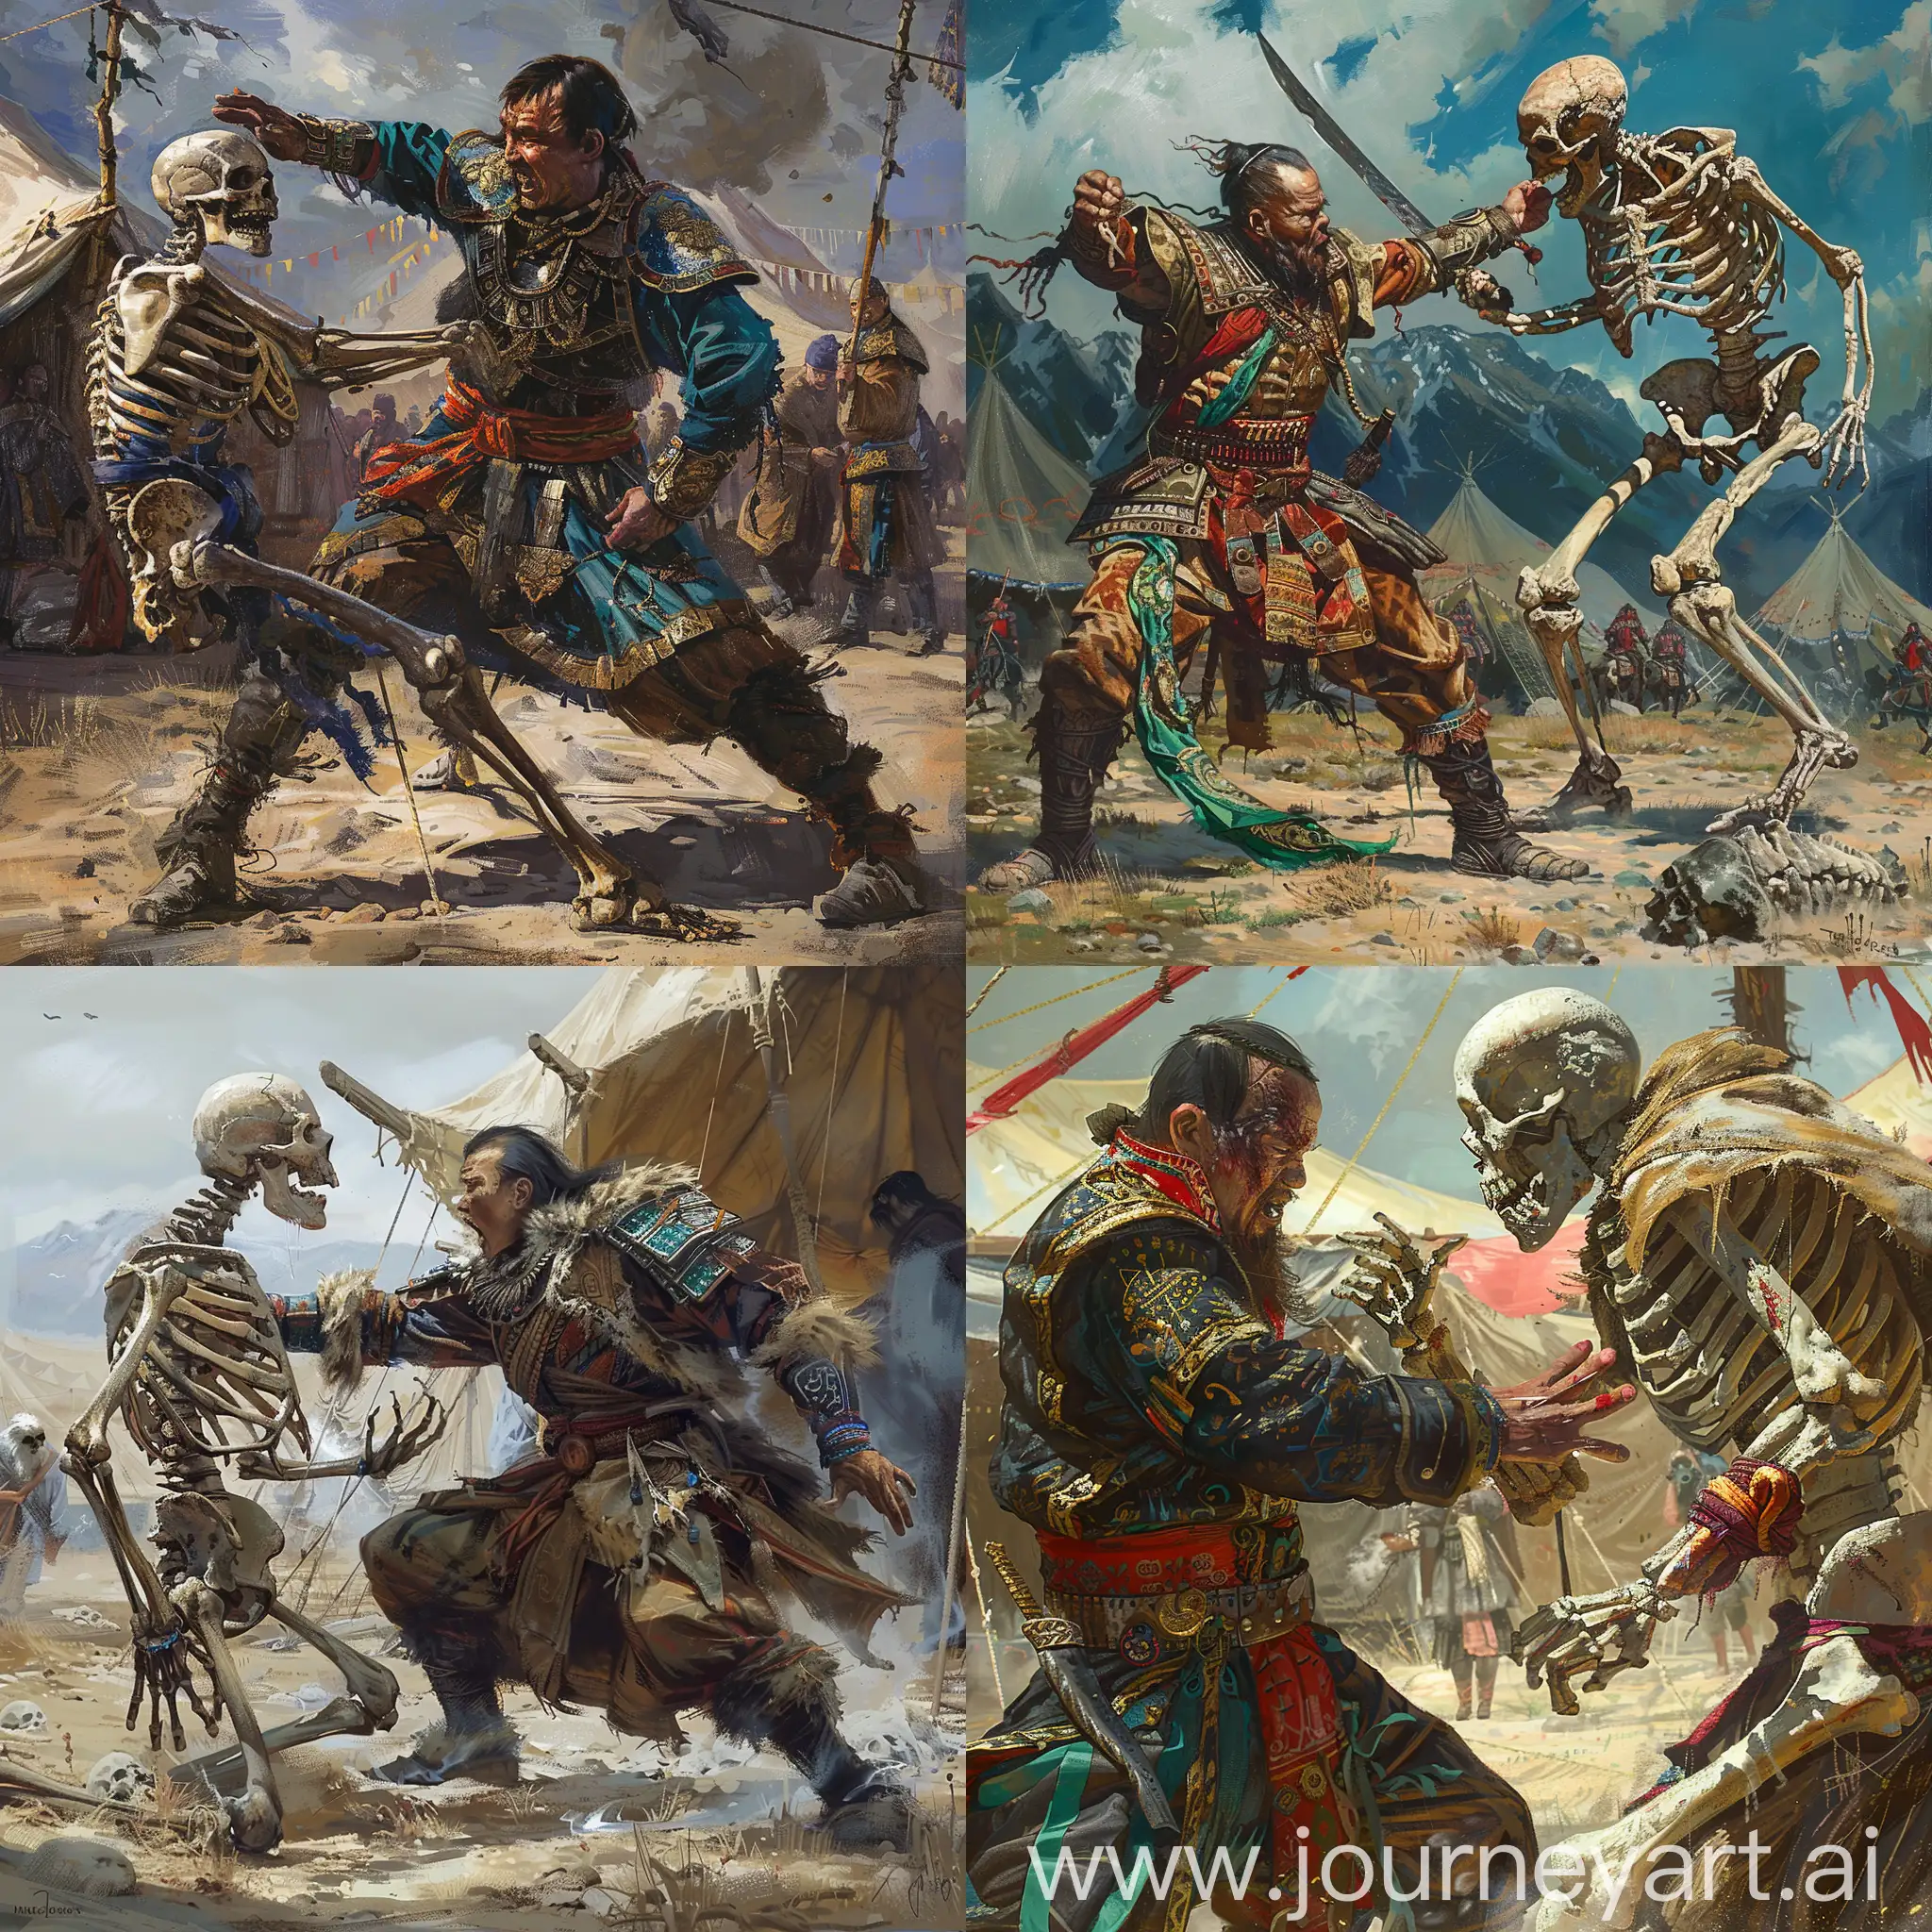 A Mongolian nomad (looking like Noyan) fighting with the skeleton of a Mongolian Khan (the skeleton has a goatee.) in front of the Mongolian tent. Dark Fantasy